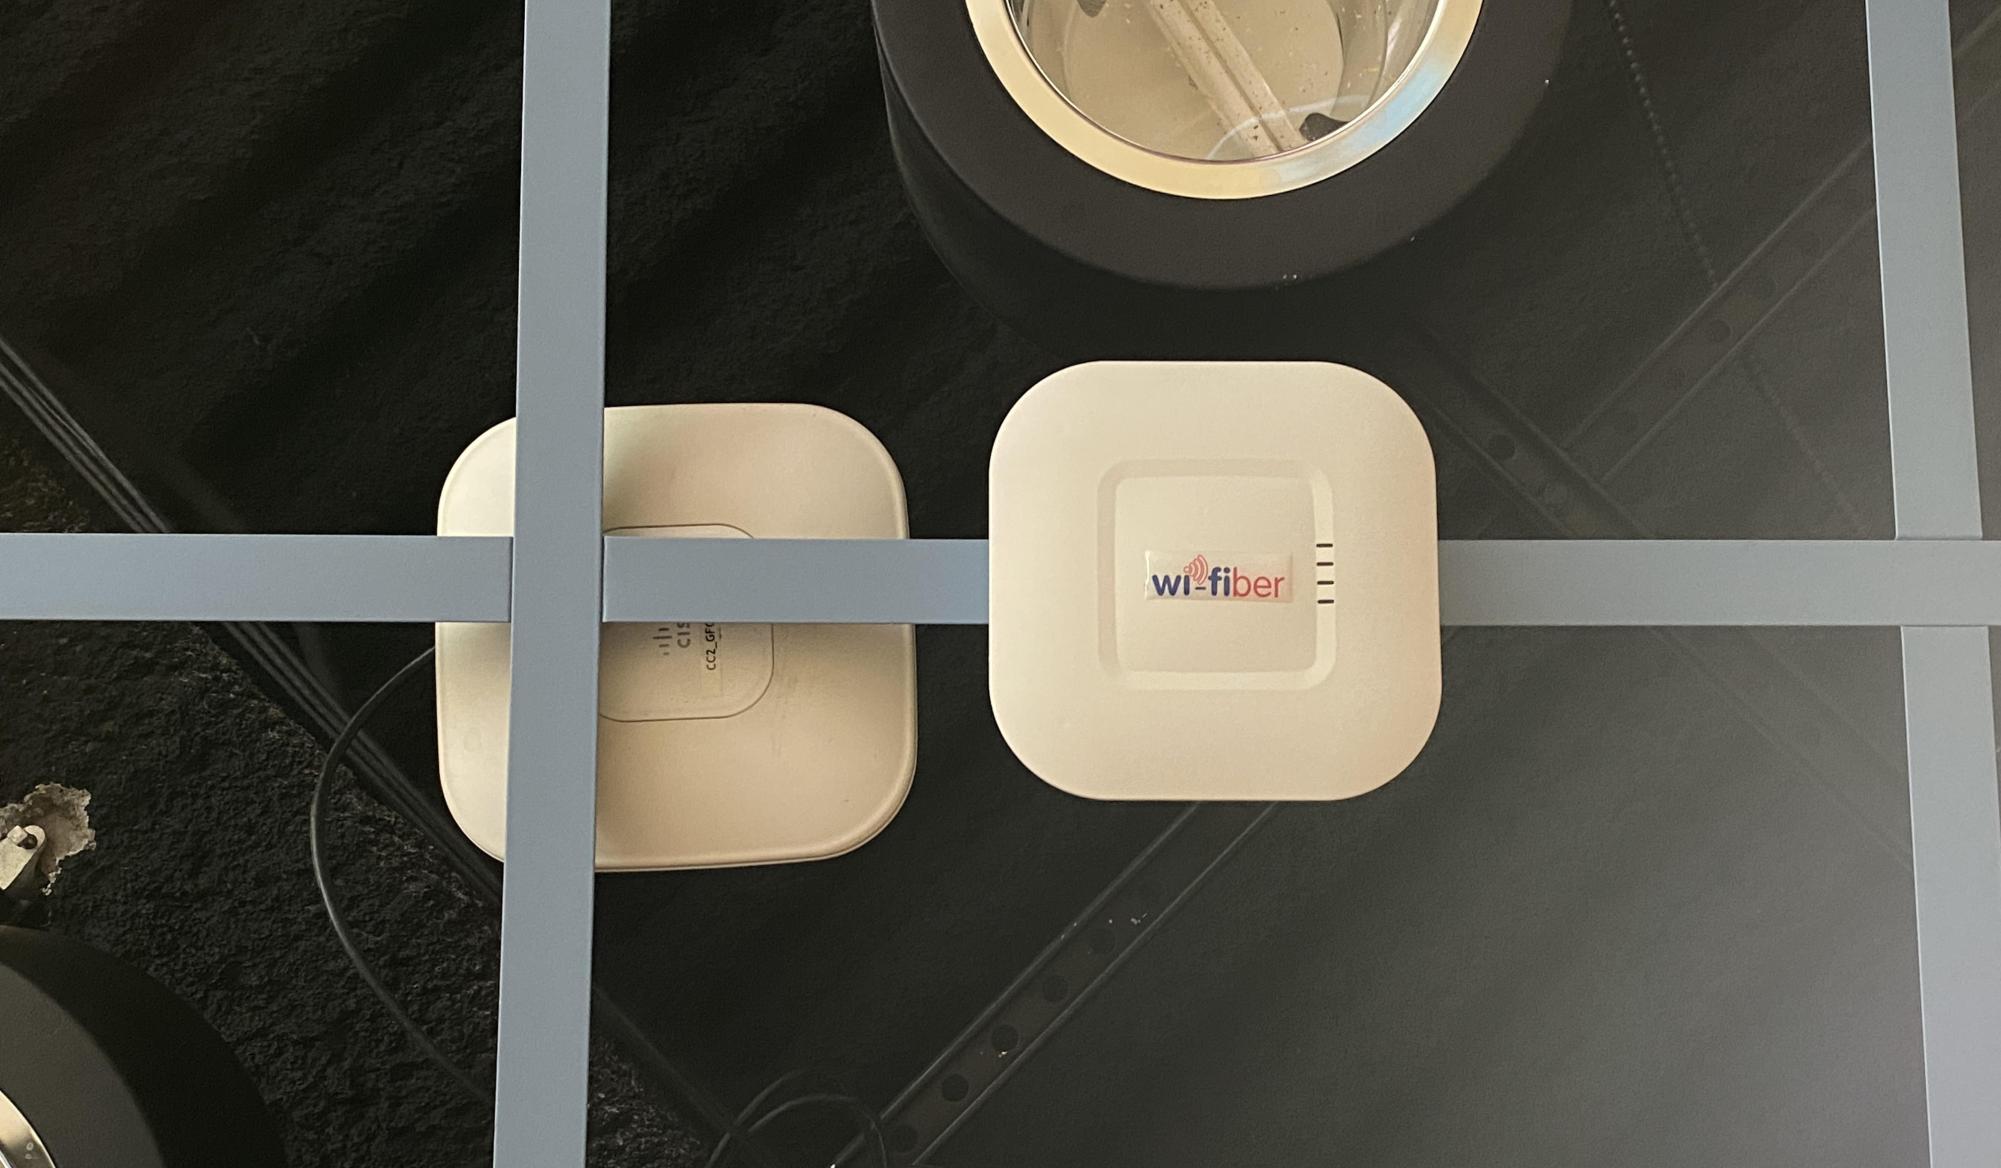 A Wi-Fiber access point in Grounds for Change is mounted to the ceiling, but not connected to the network. An older access point sporting an array of wires is mounted directly next to the Wi-Fiber access point.